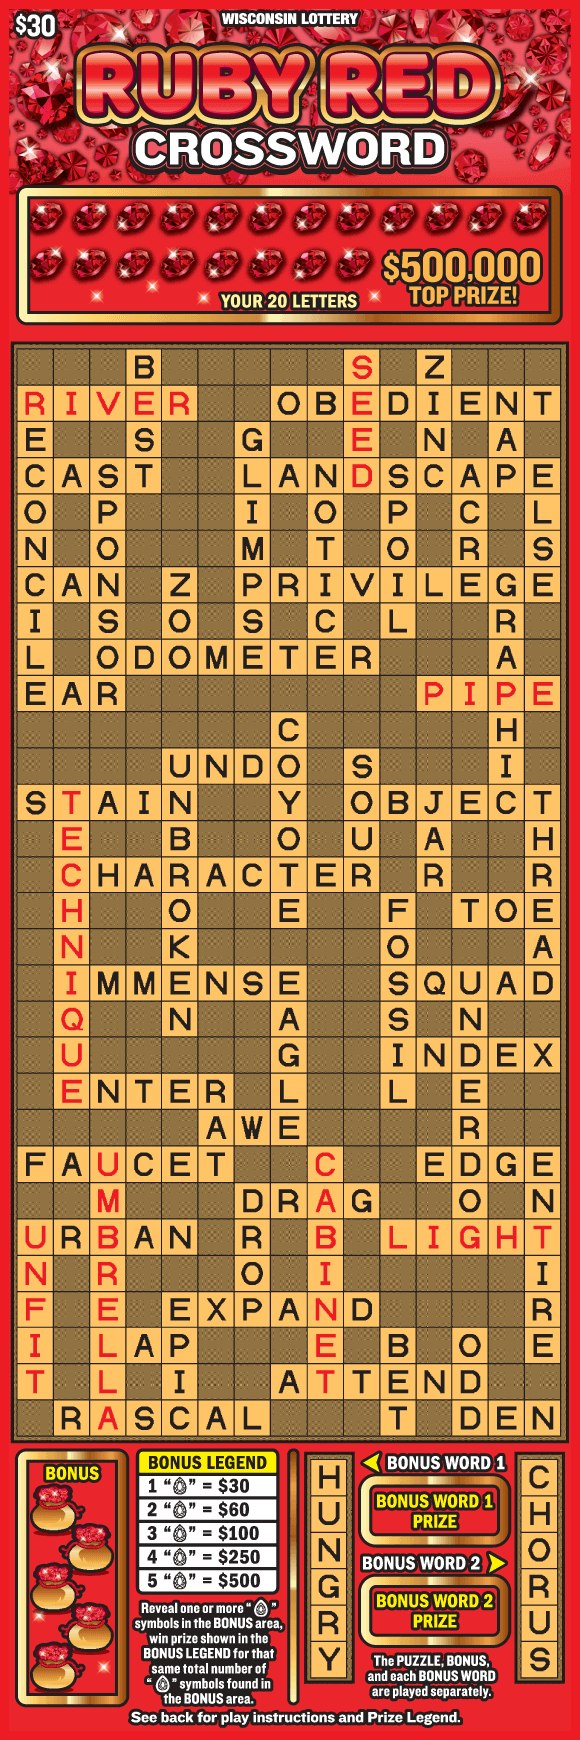 assortment of shimmering red rubies on bright red background with tall gold crossword board on Wisconsin Lottery game